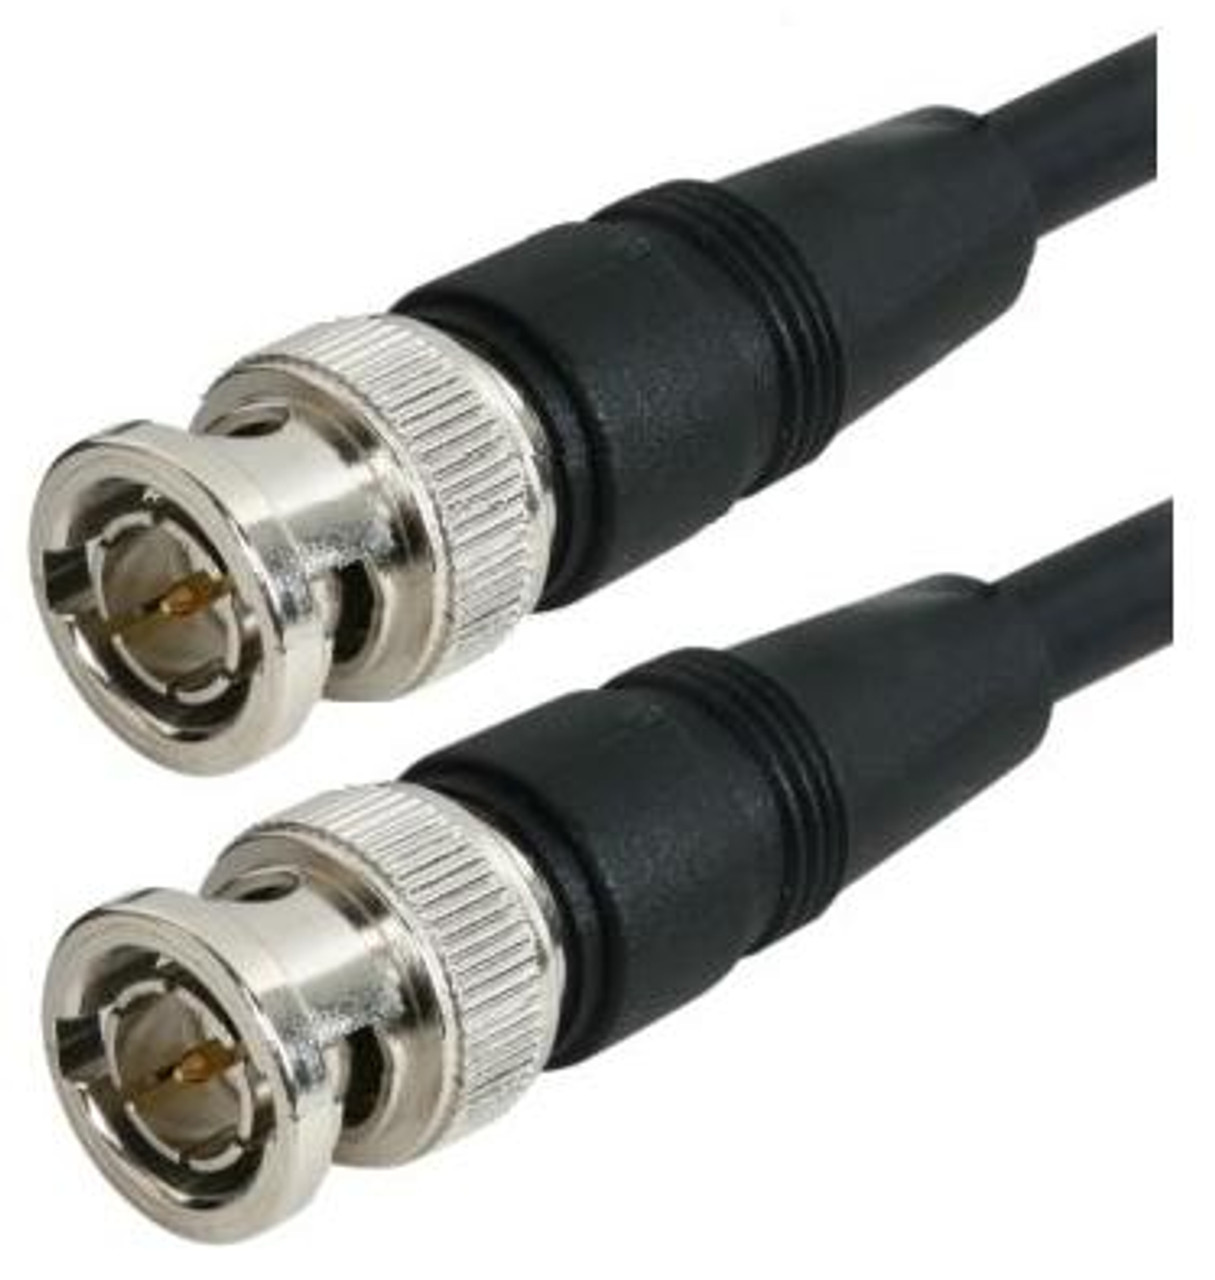 3-Foot - RG-59 BNC Coaxial Patch Cable - 75-Ohm - Black Jacket